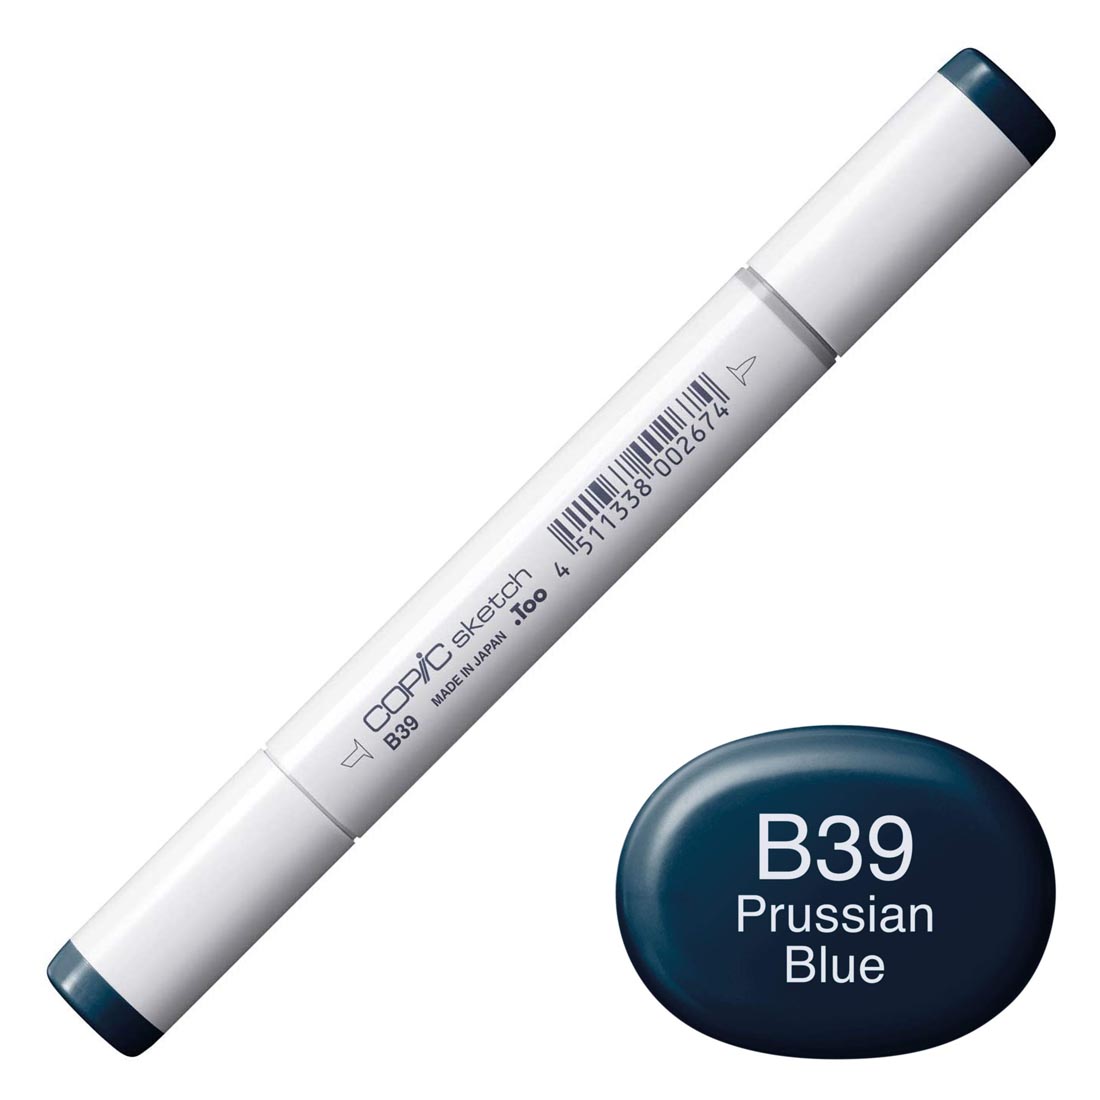 COPIC Sketch Marker with a color swatch and text of B39 Prussian Blue